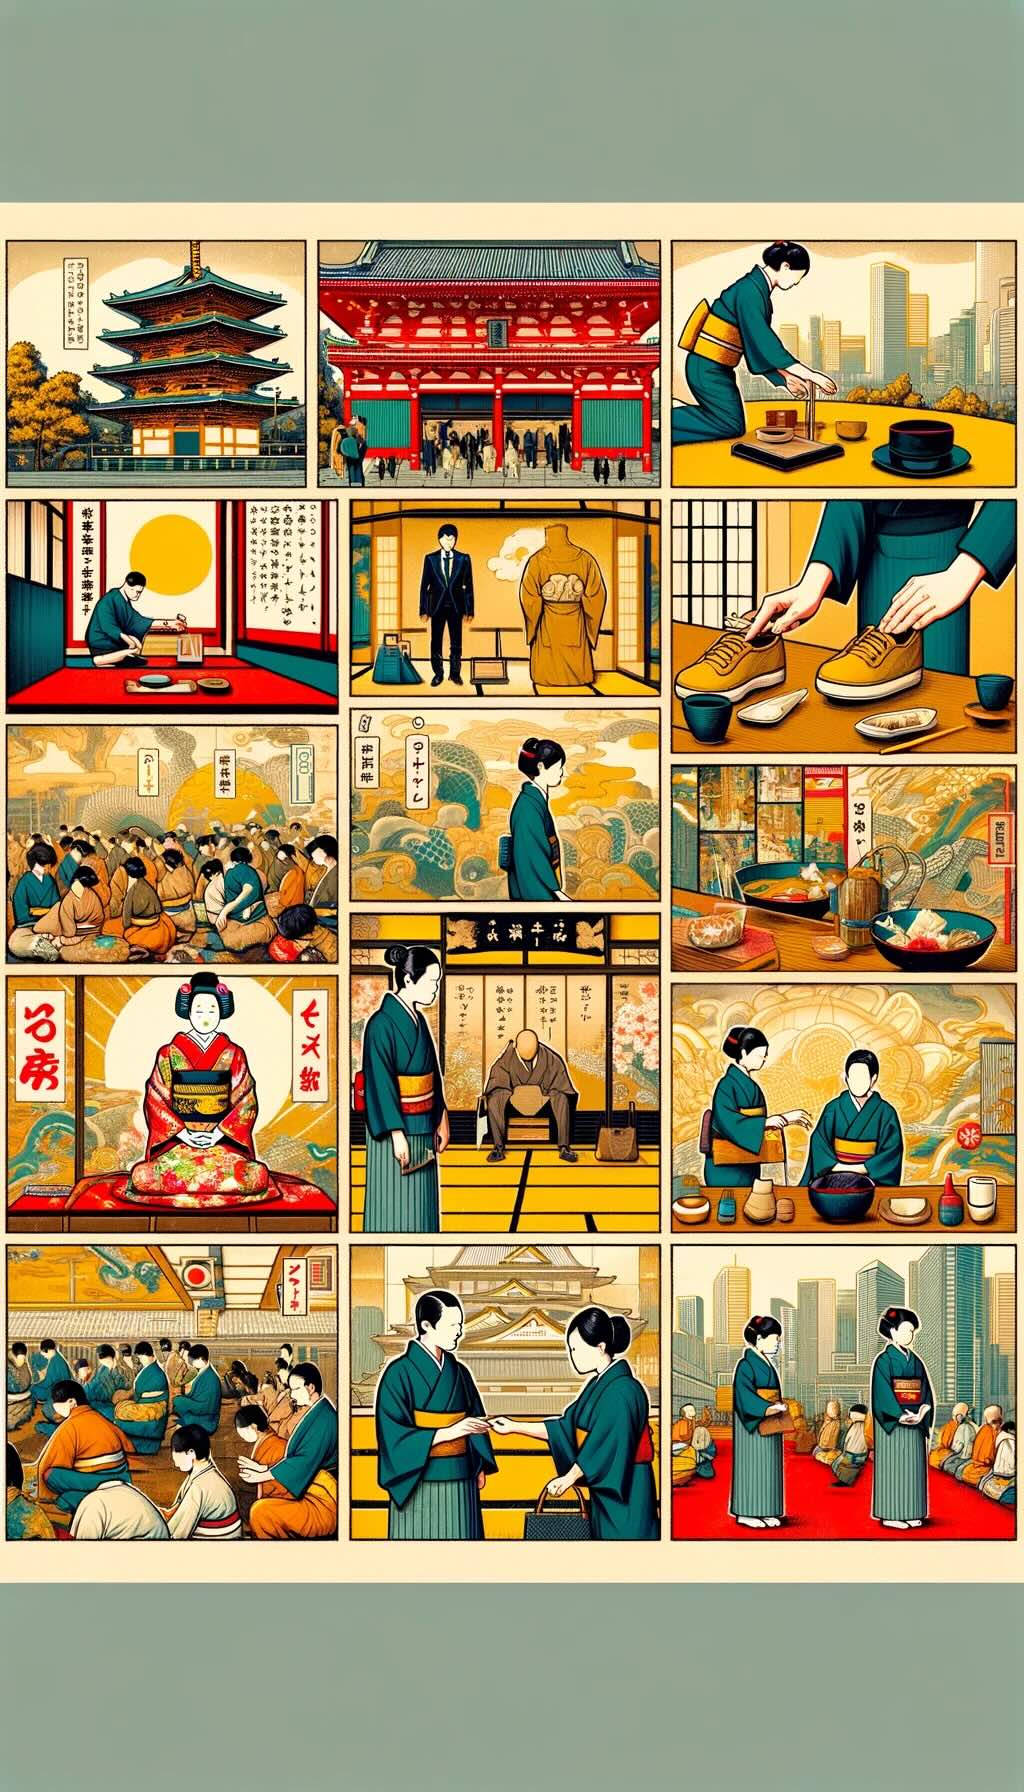 Japanese etiquette and social norms depicts the blend of ancient traditions and modernity, showcasing elements of traditional Japanese culture alongside modern cityscapes. Key aspects of etiquette, such as removing shoes, bowing, and handling objects with care, and emphasizes cultural awareness as key to navigating Japan. The concept of 'wa' (harmony) is highlighted, alongside scenes depicting cultural practices like quietness on public transport and the custom of not tipping. It conveys the importance of respect, politeness, and consideration in Japanese society.